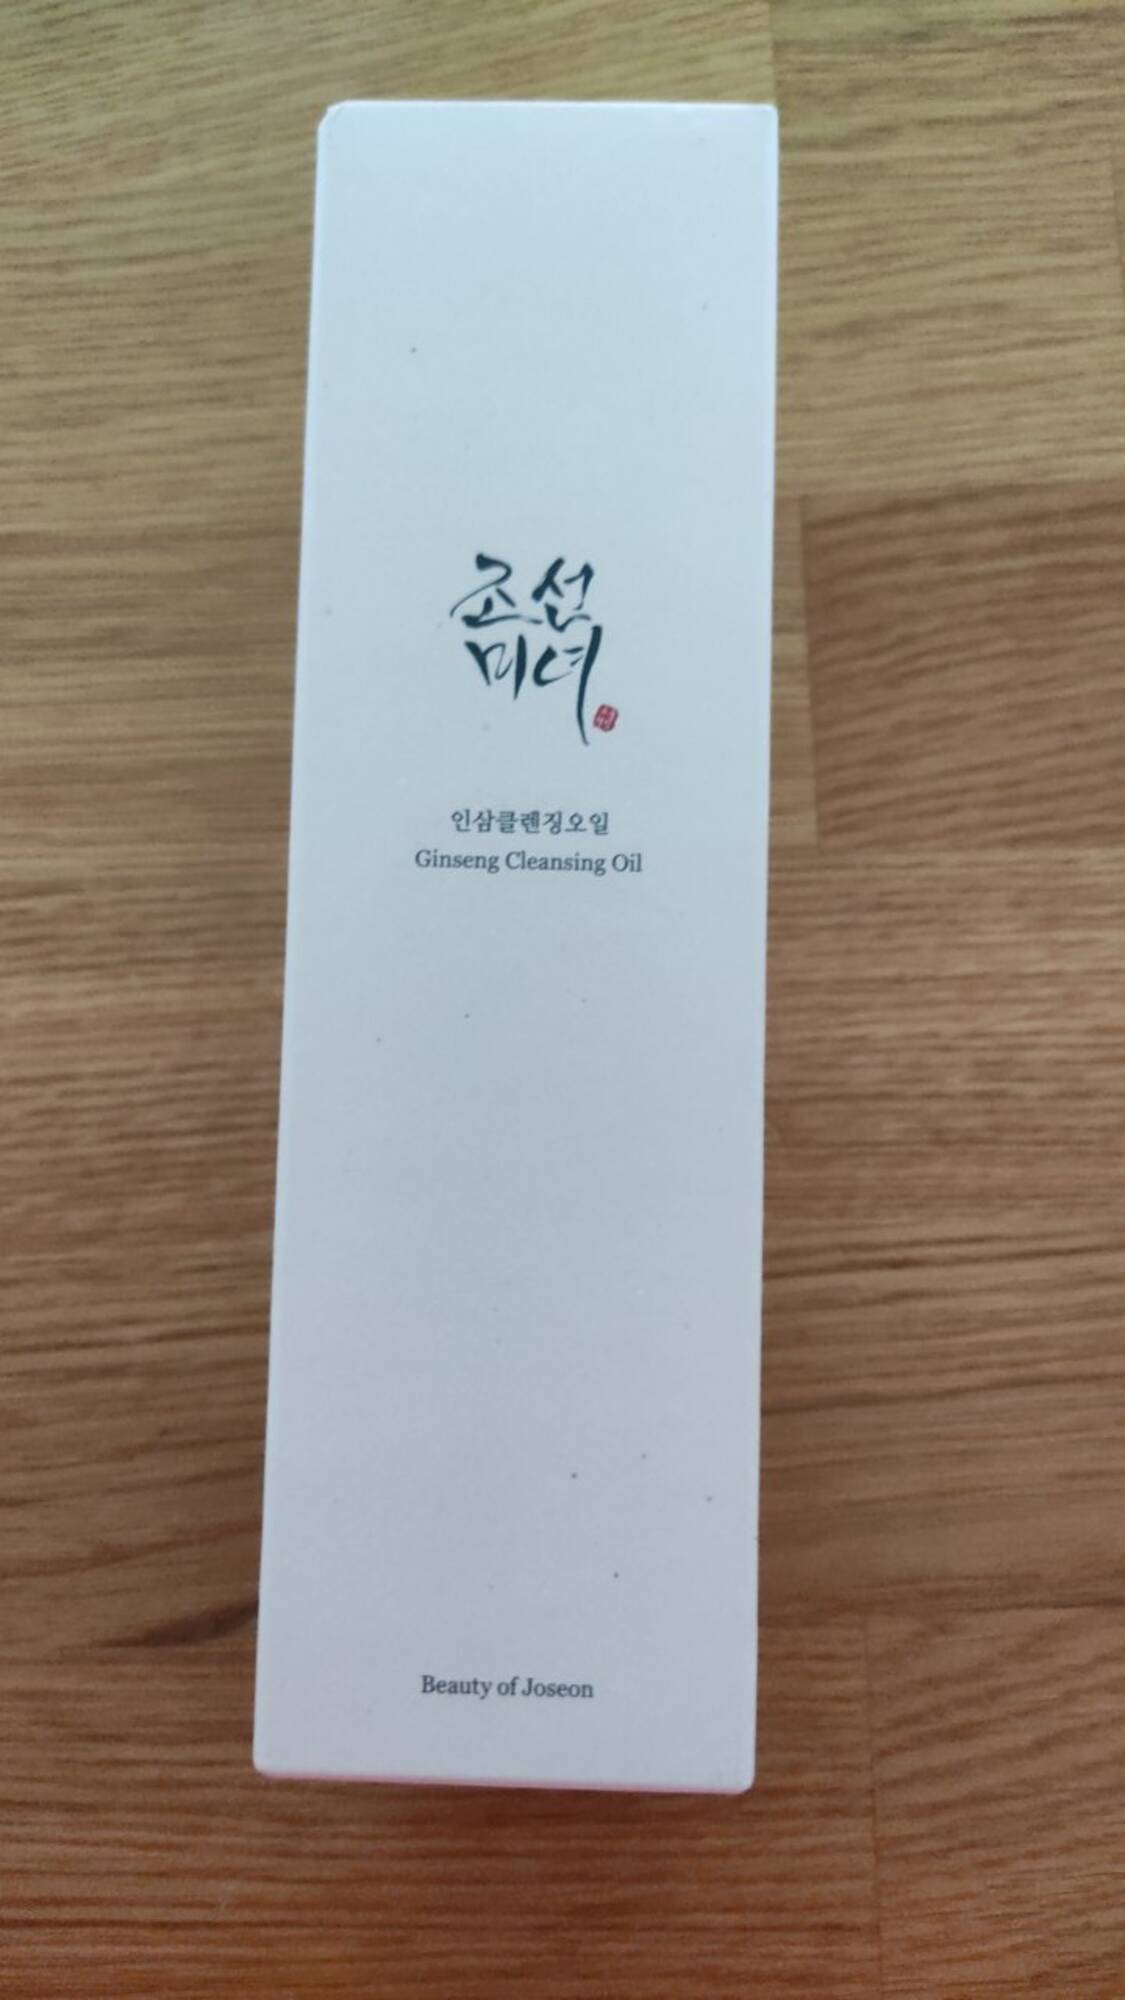 BEAUTY OF JOSEON - Ginseng cleansing oil